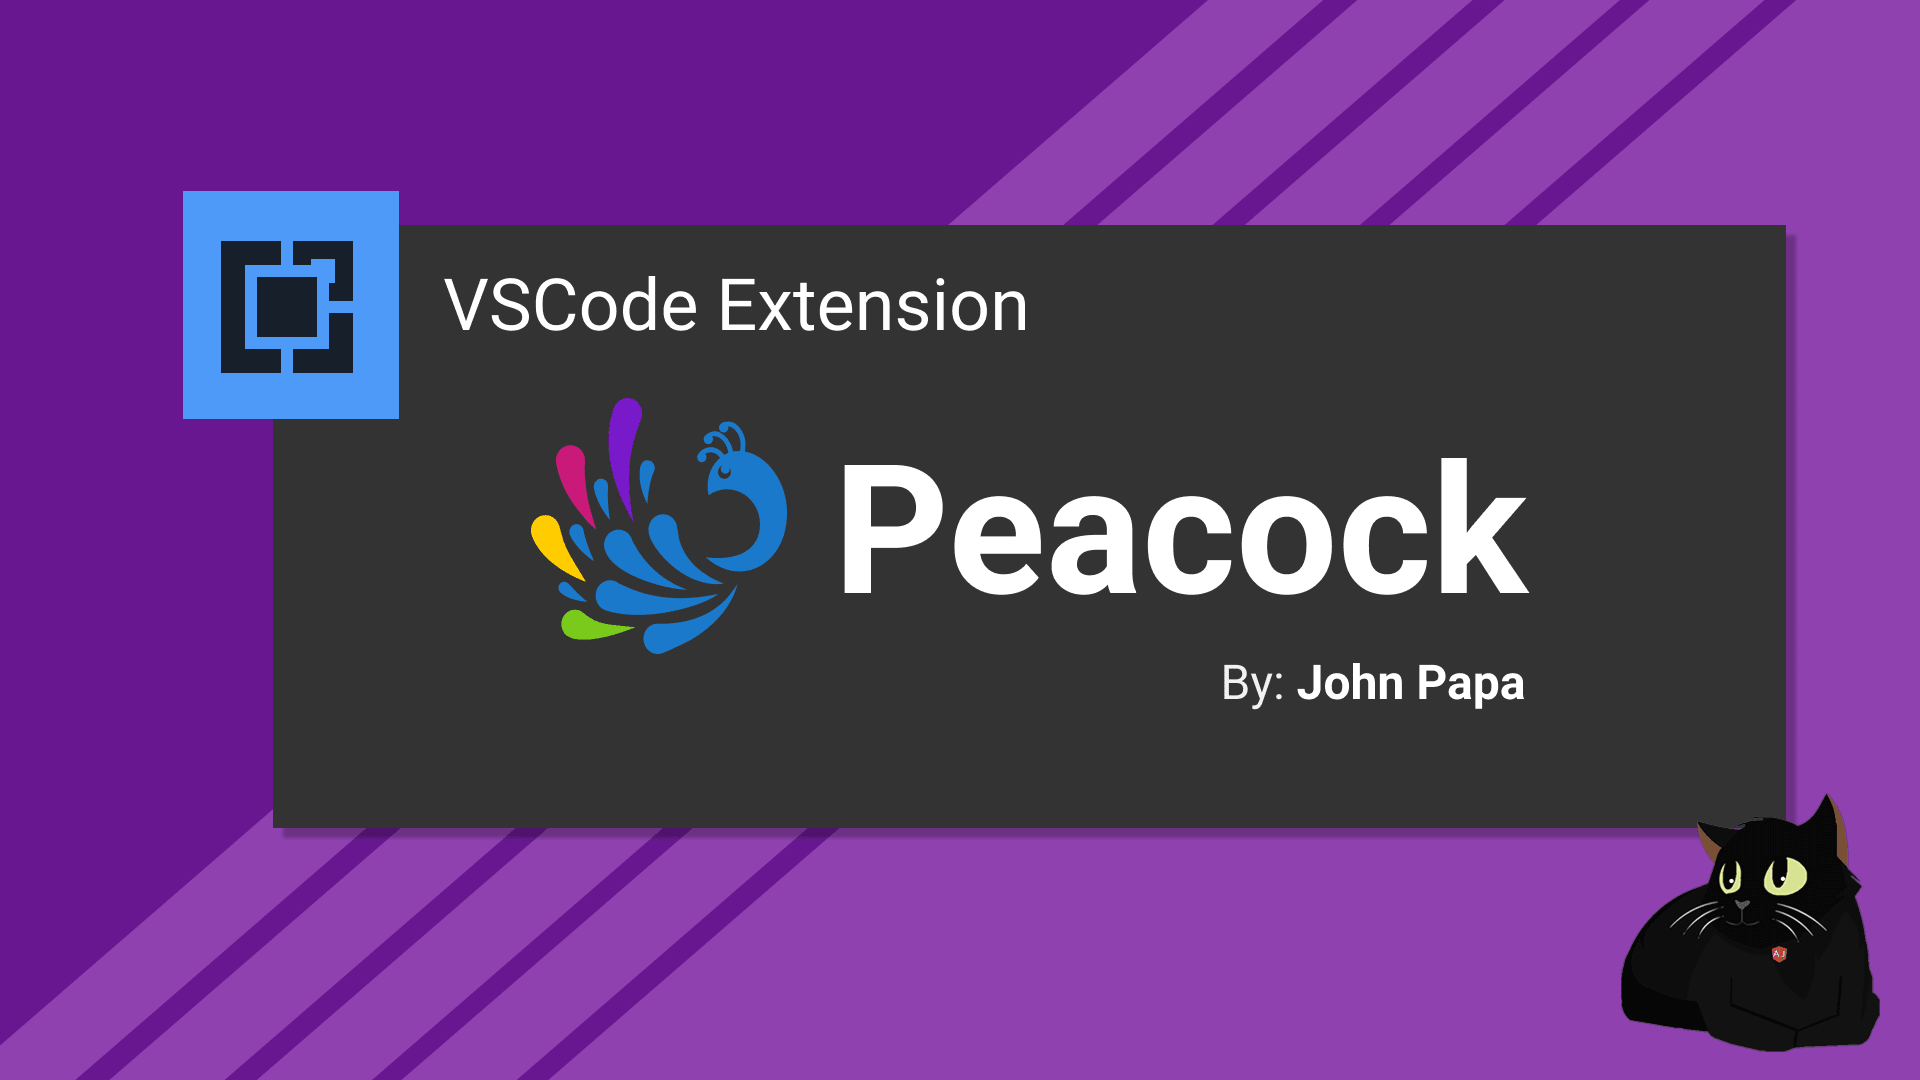 Peacock VSCode Extension